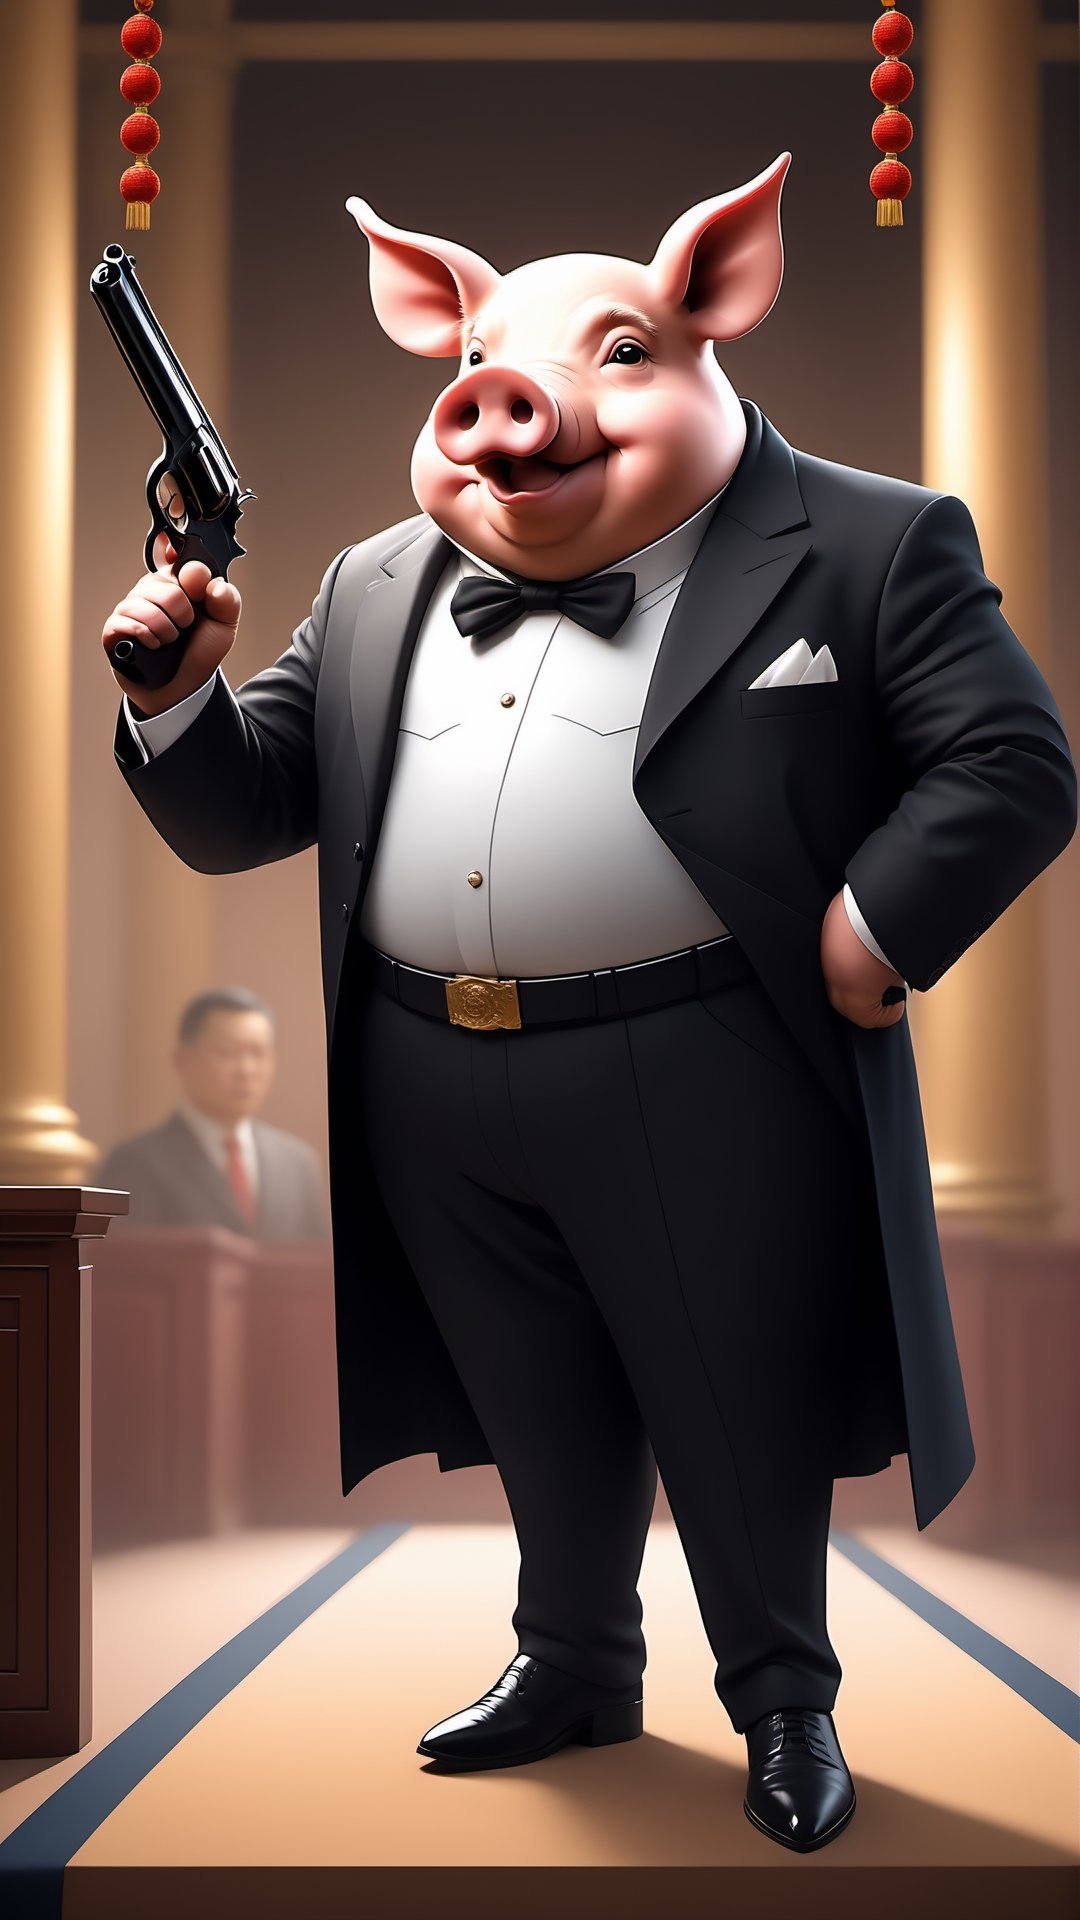 A political dictator, an arms dealer,
((a pig with Chinese characteristics, revolver in hand:1.5)), ((Revolver)), 
((Pig President)), (Pig President), (Pig Man), fat figure, (animal anthropomorphic))
super detail, gangster theme, smoking, black suit, Father of God style, looking at the audience, standing on a balcony, solid color background, Super clear, super facial detail, intricate, whole body, height :1.1, (castle :1.3),